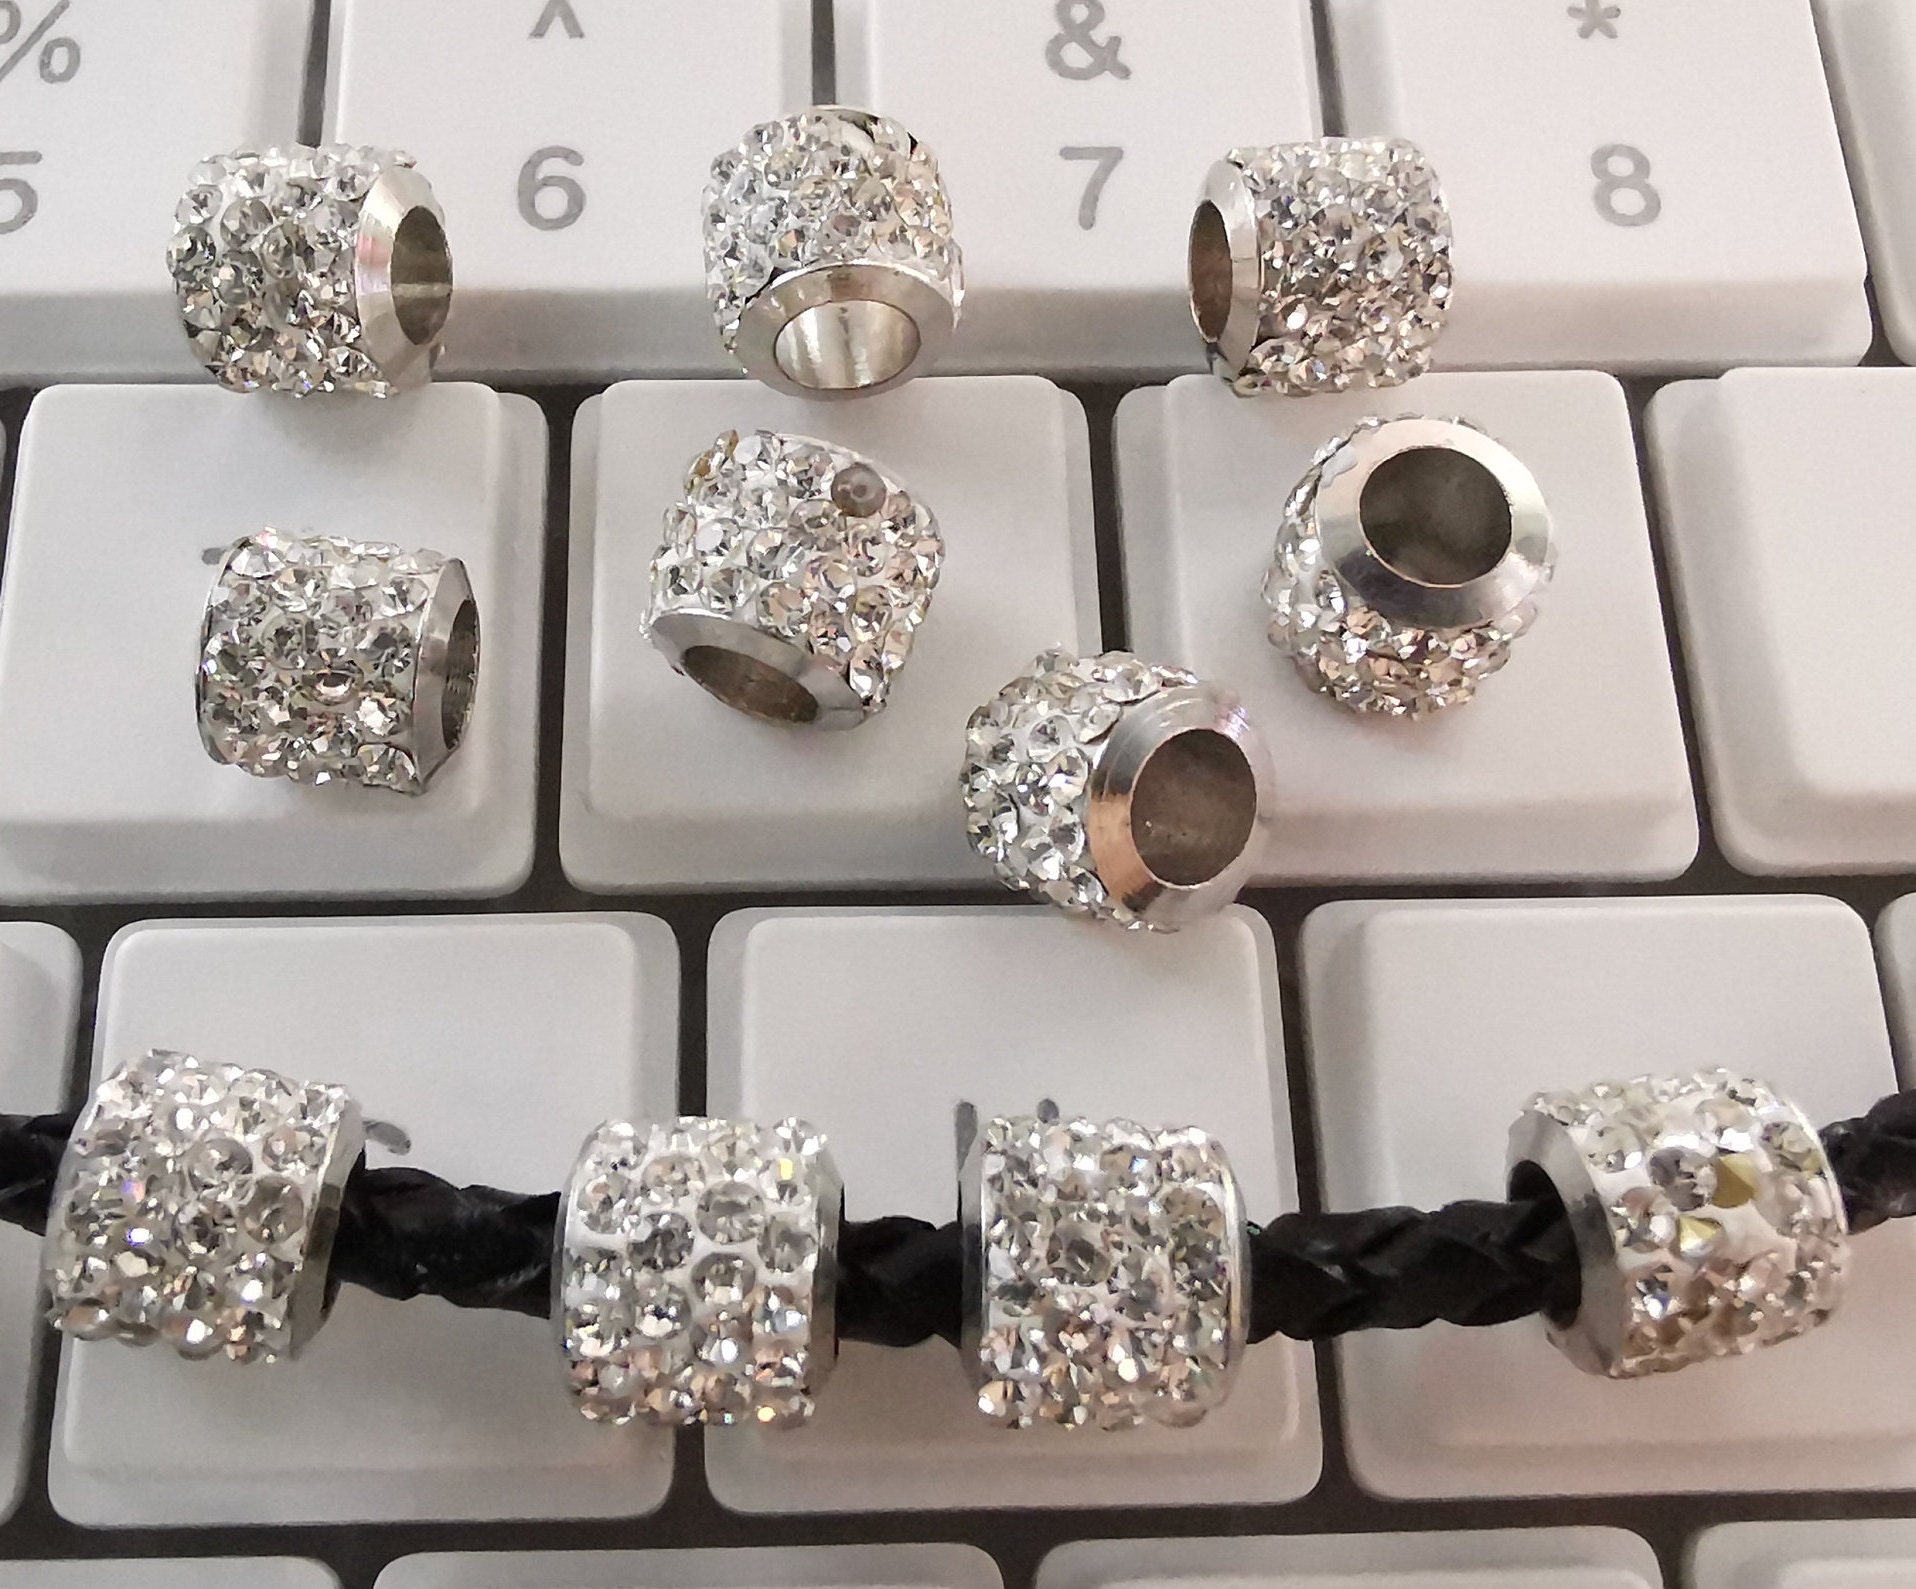 Silver Plated Brass 2x4mm Rondelle Spacer Beads with approximately 2mm  Large Hole - approx. 8 inch strand